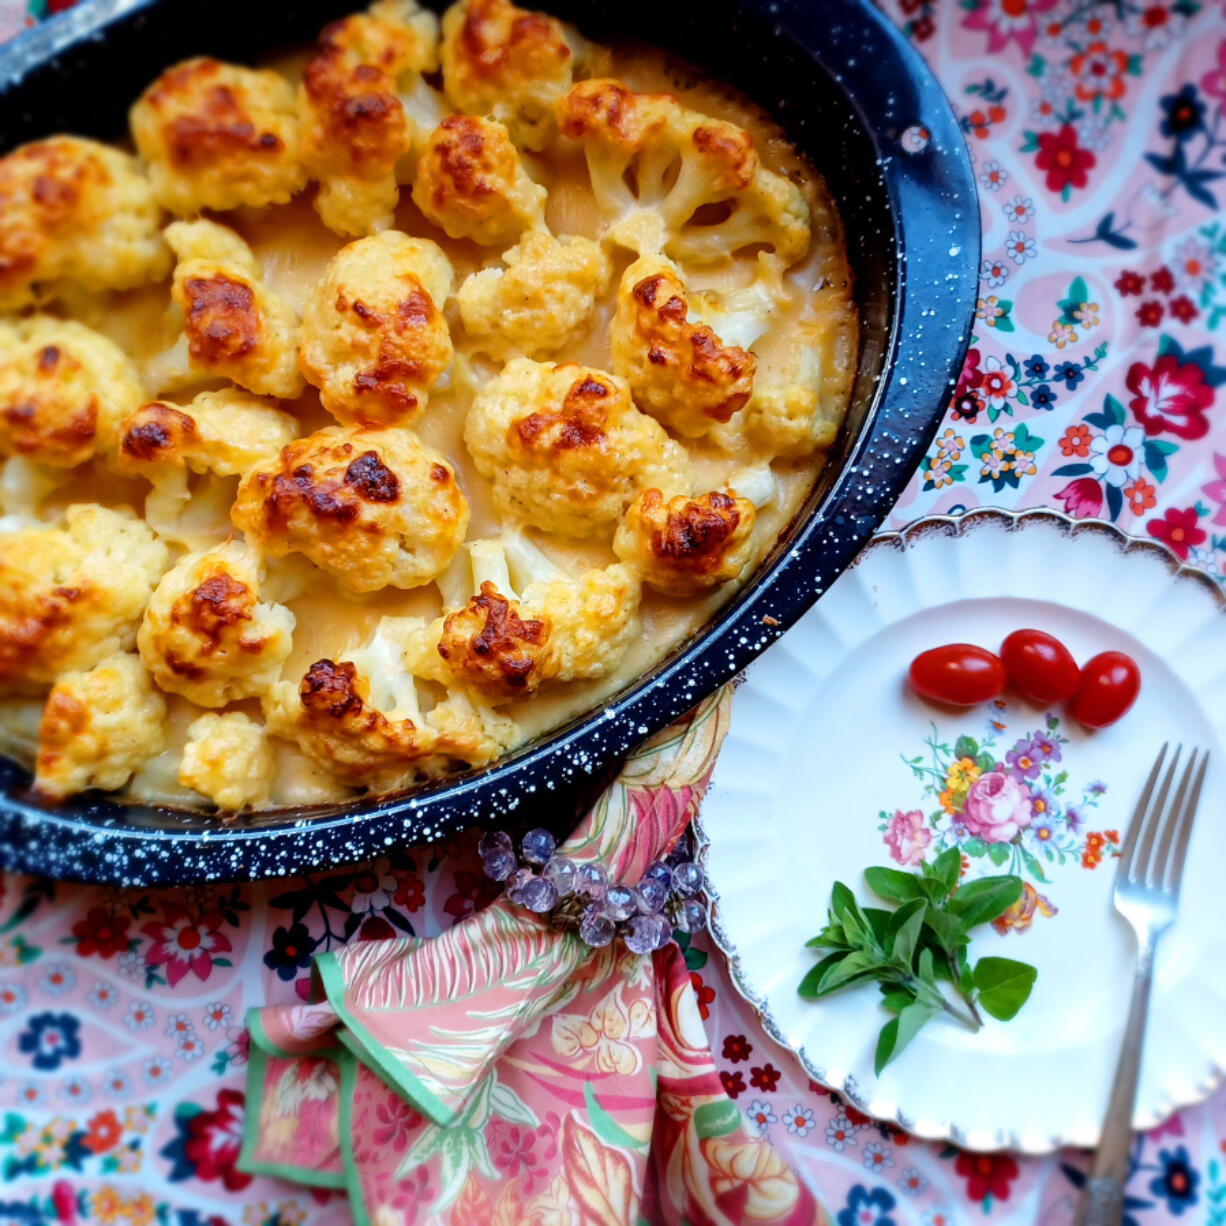 Cauliflower Cheese is a classic British dish made, unsurprisingly, with cauliflower and cheese.